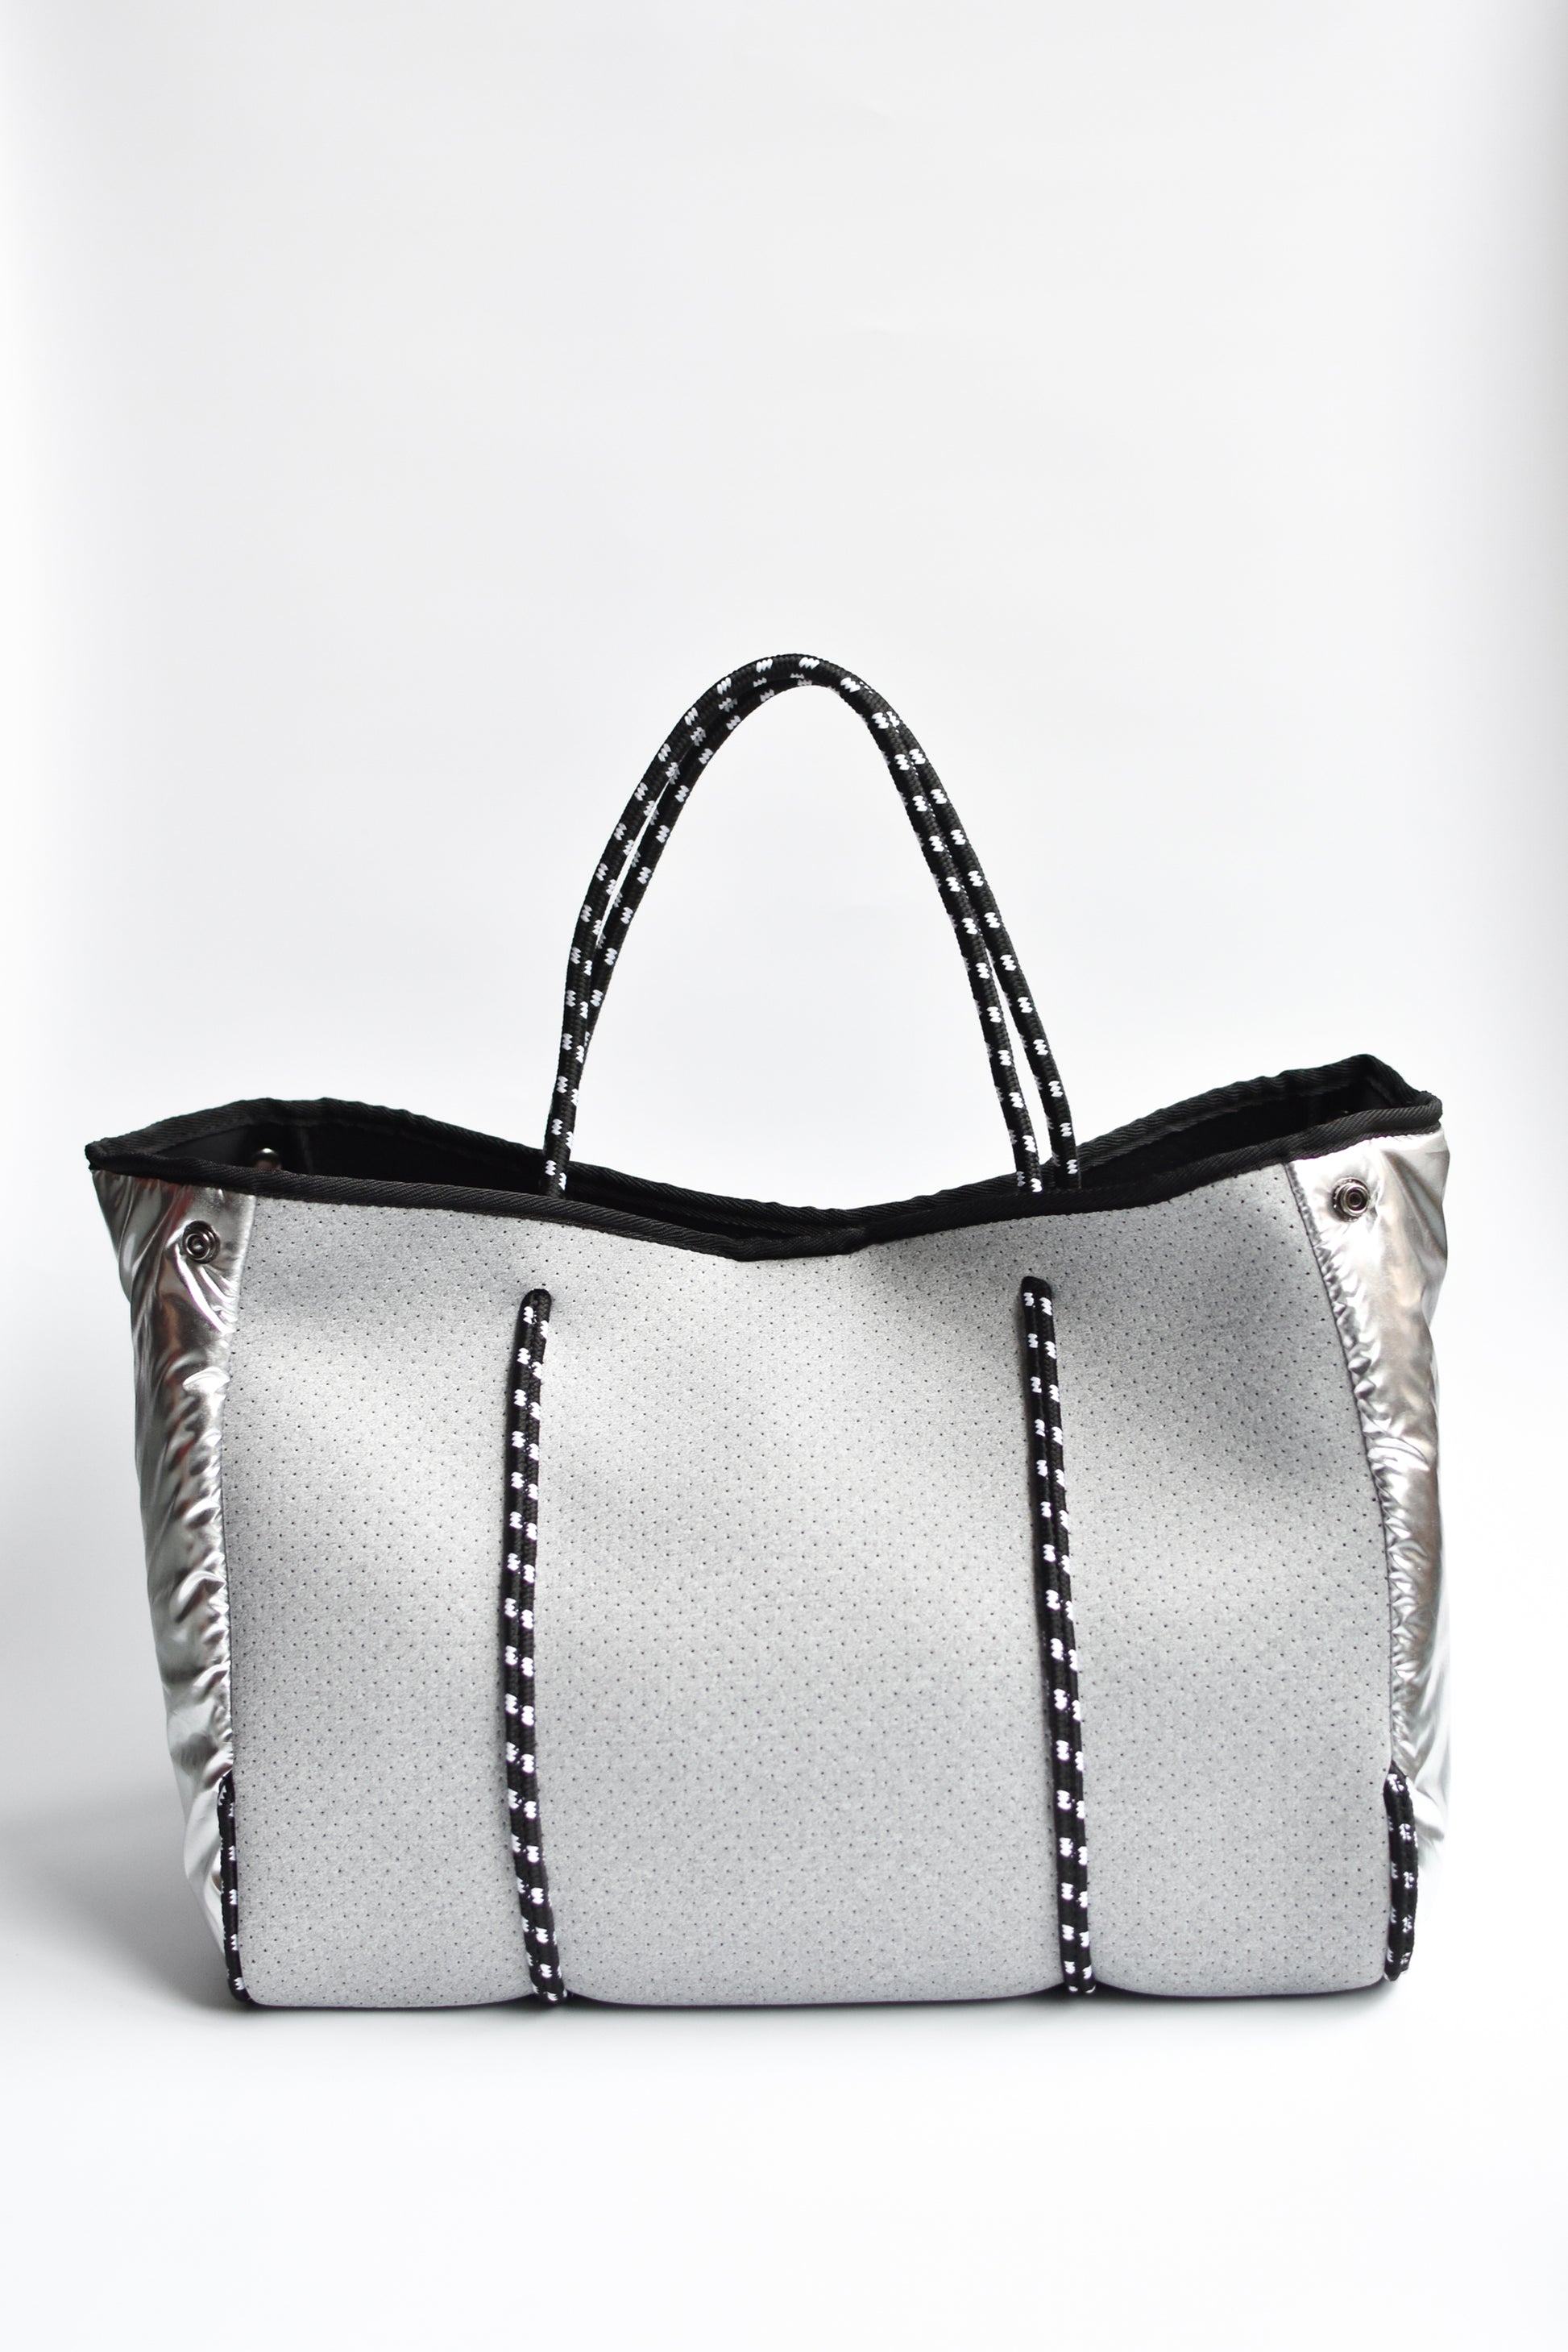 Perforated gray neoprene tote bag with black cord handle and adjustable high shine silver sides.